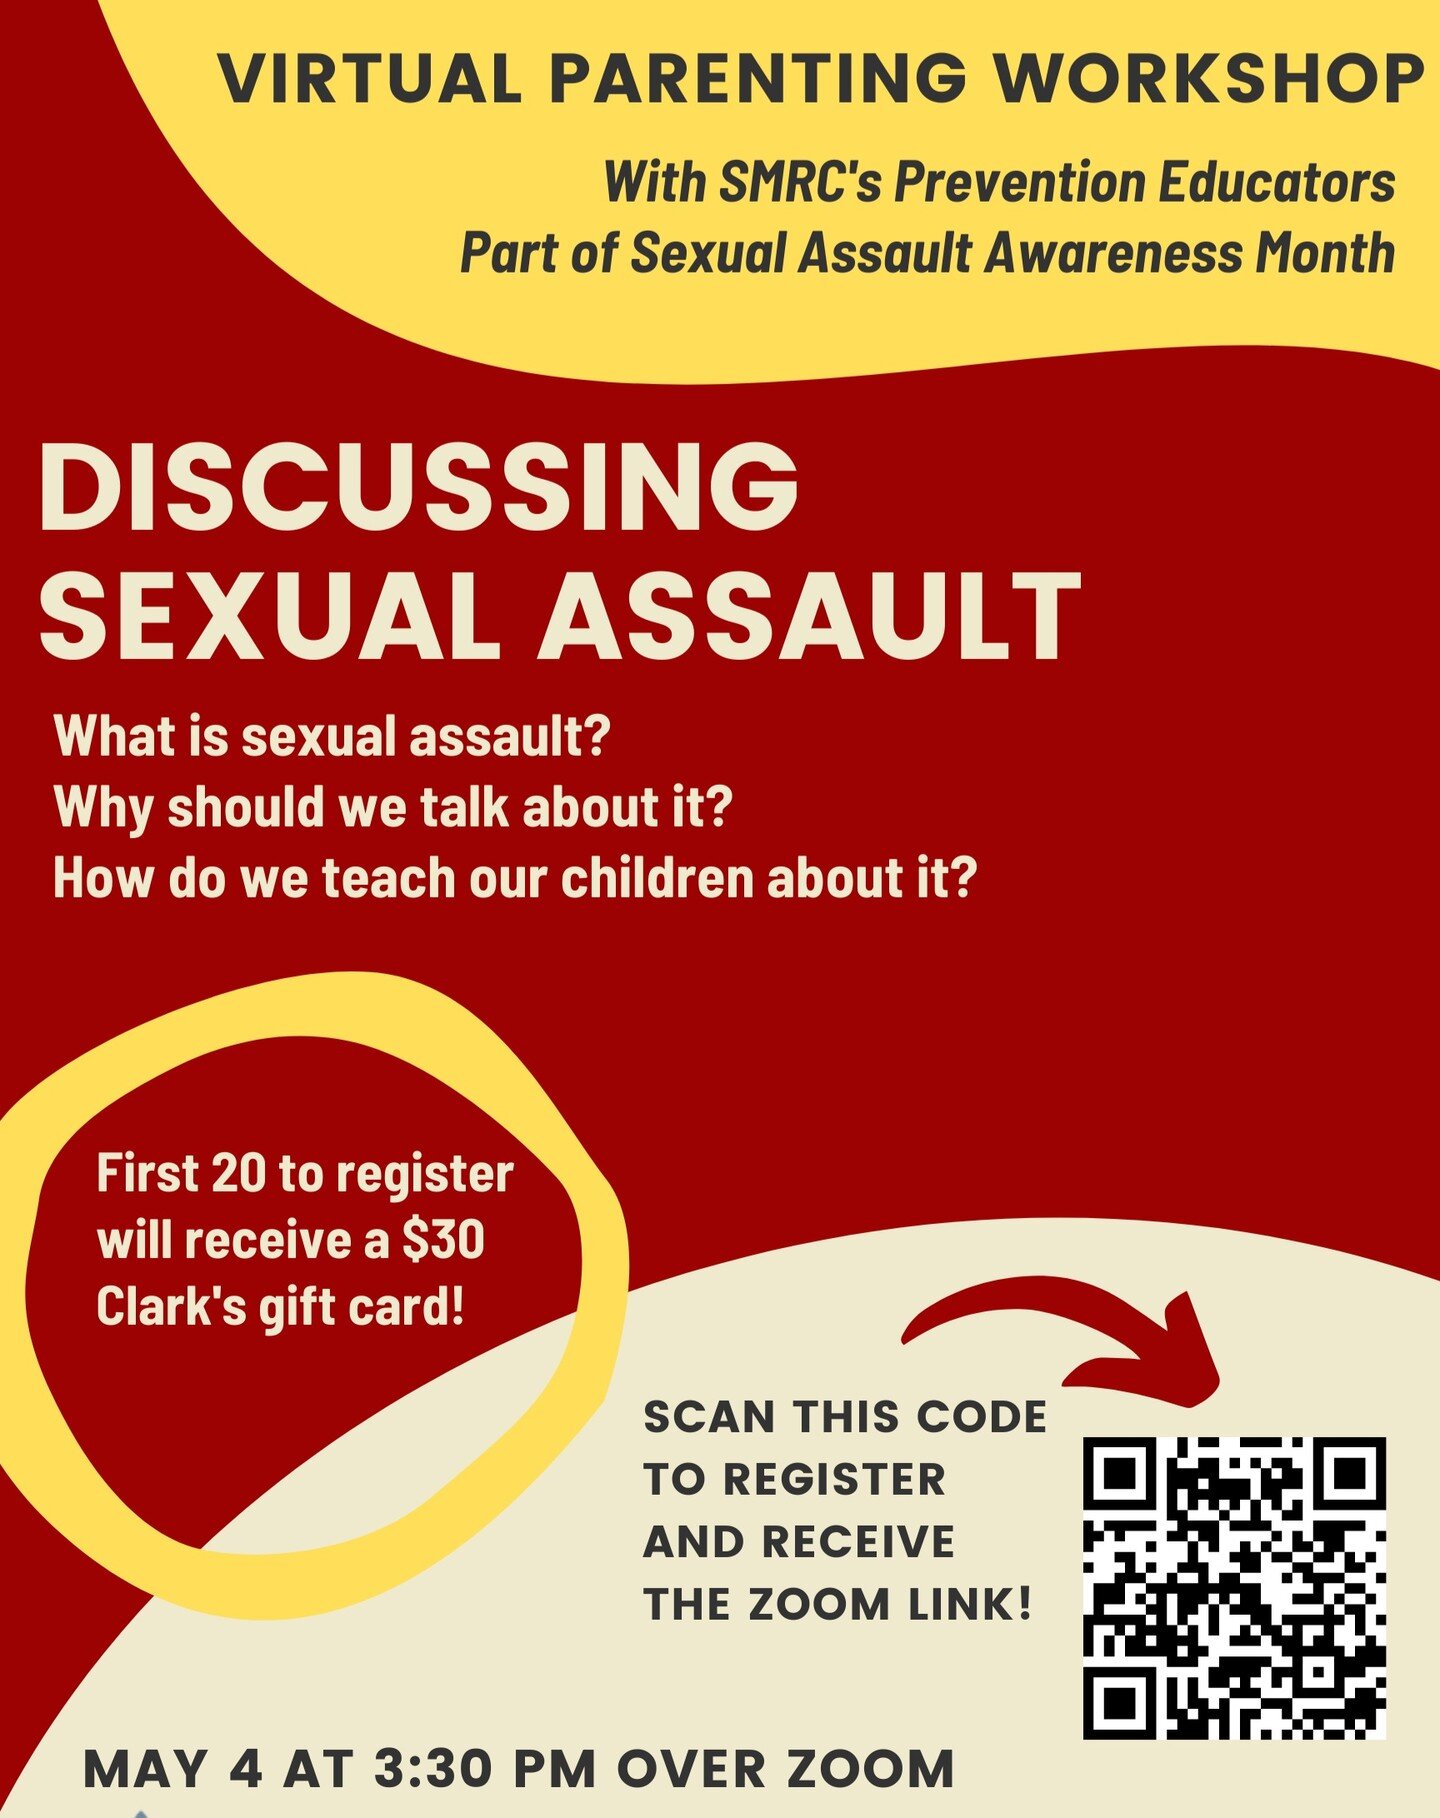 Did you know that in Colorado, 42% of victims experienced their first sexual assault before the age of 18? 
Join us TOMORROW, May 4th at 3:30 pm for a virtual parenting workshop on how to discuss sexual assault with your teen. Register @ link in our 